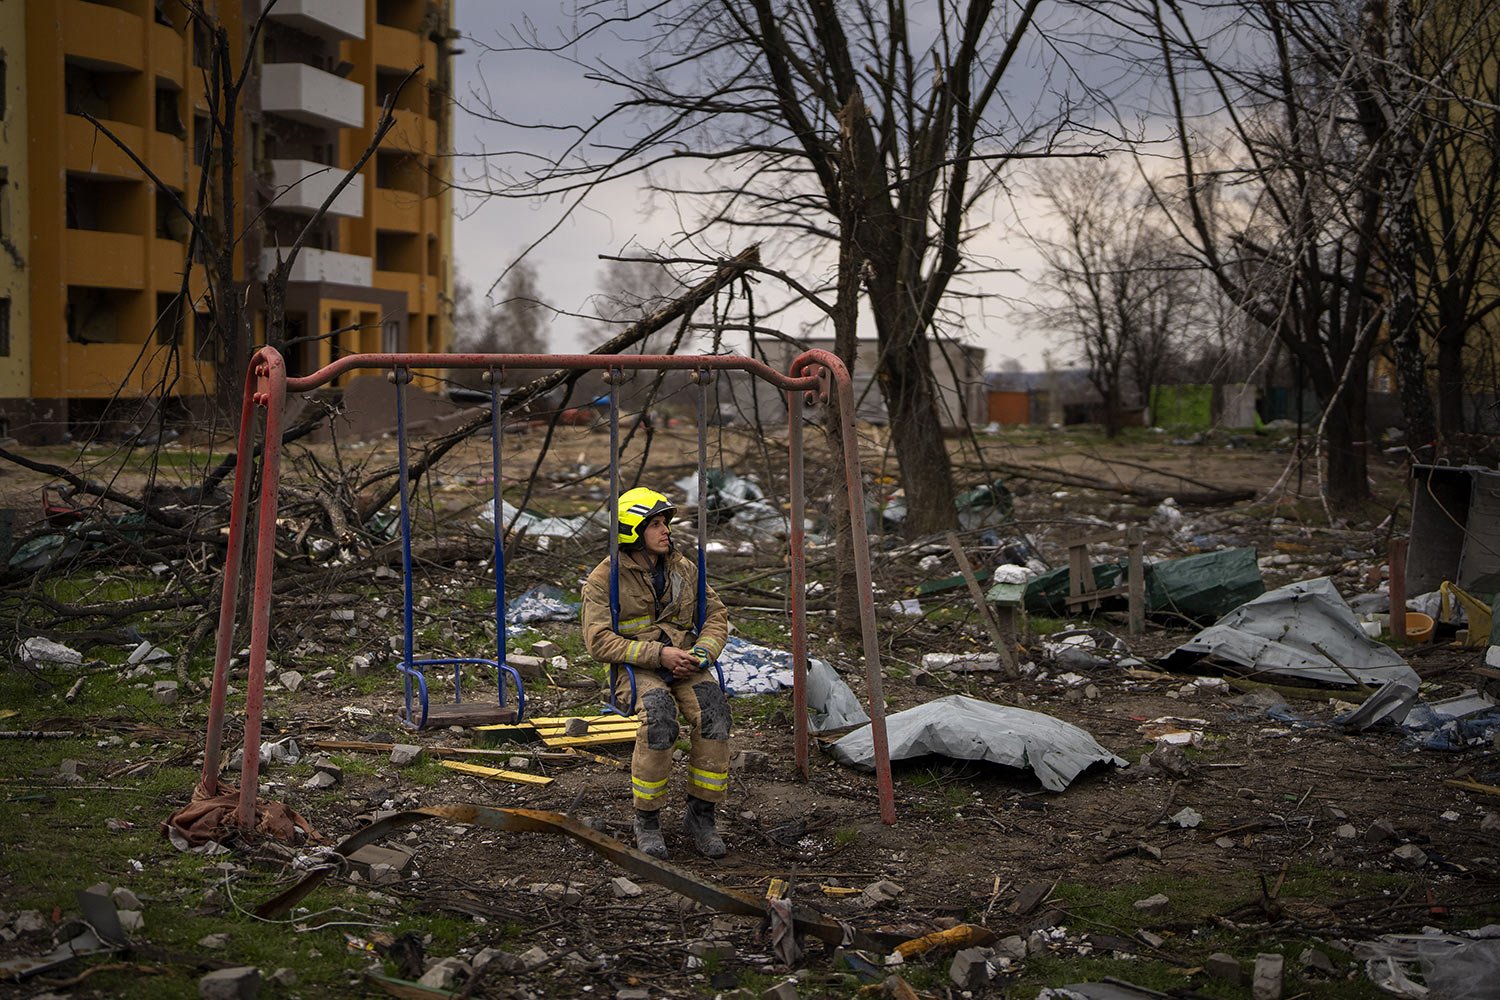  A firefighter sits on a swing next to a building destroyed by a Russian bomb in Chernihiv, Ukraine, Friday, April 22, 2022. (AP Photo/Emilio Morenatti) 